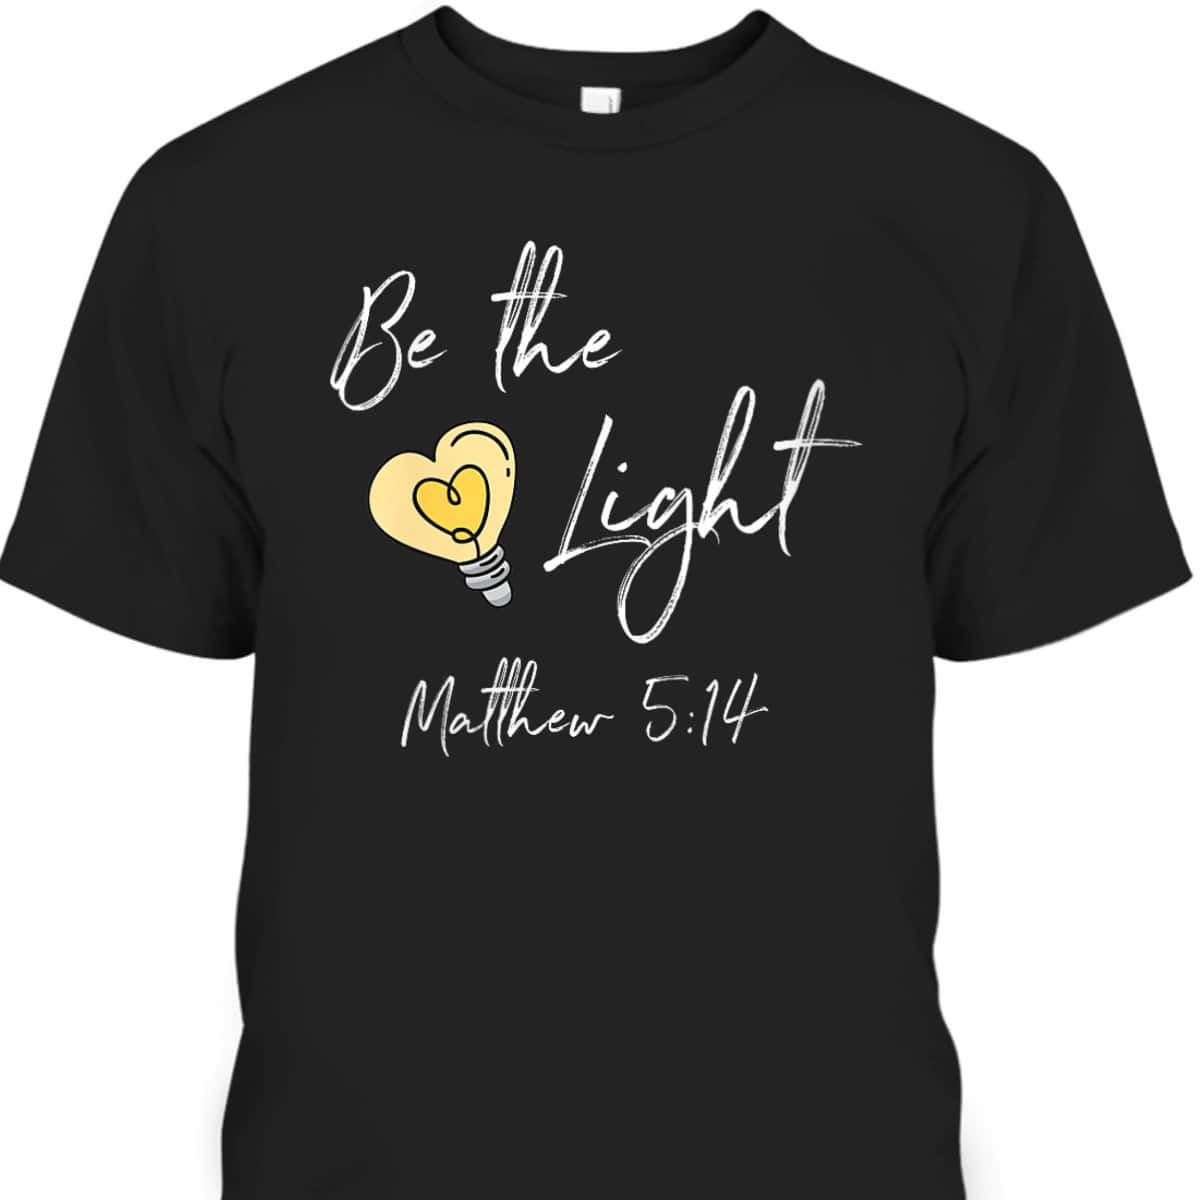 Be The Light Matthew 514 T-Shirt Awesome Bible Verse Gift For Any Christian